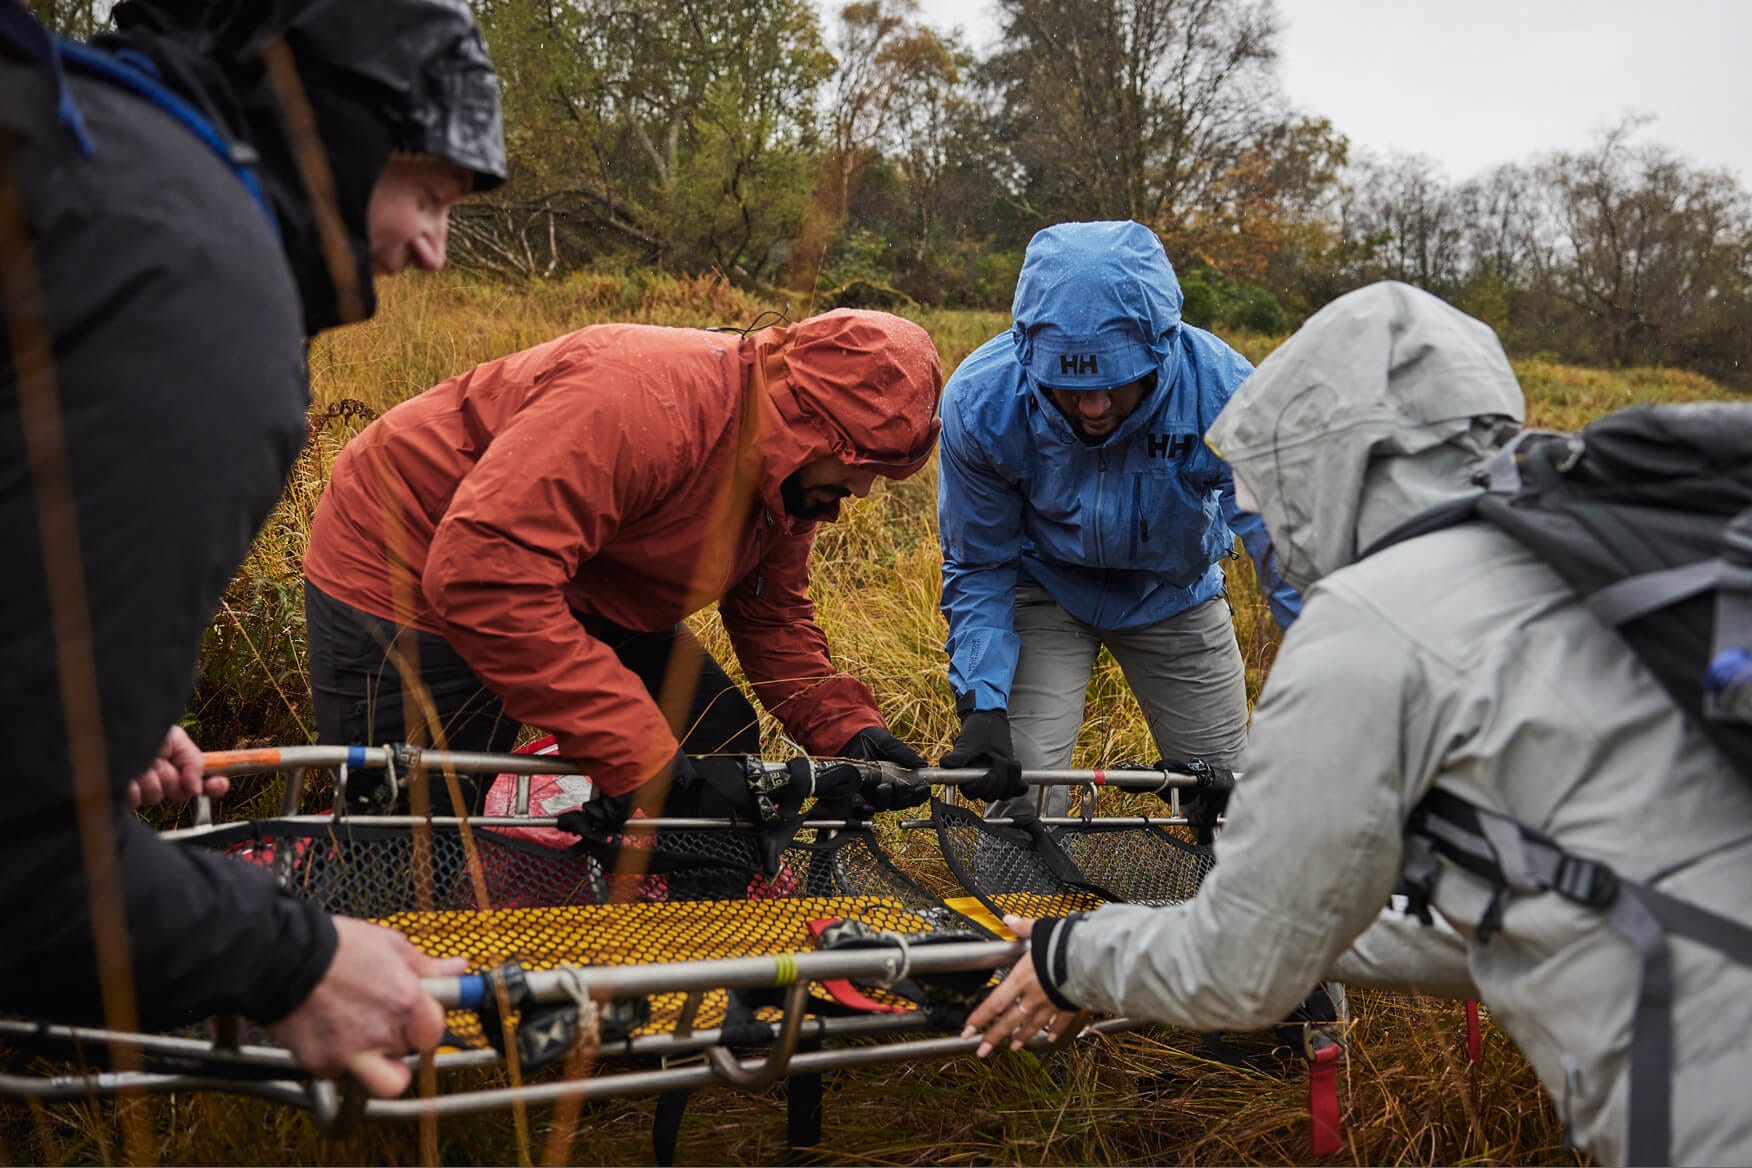 People putting together a rescue stretcher